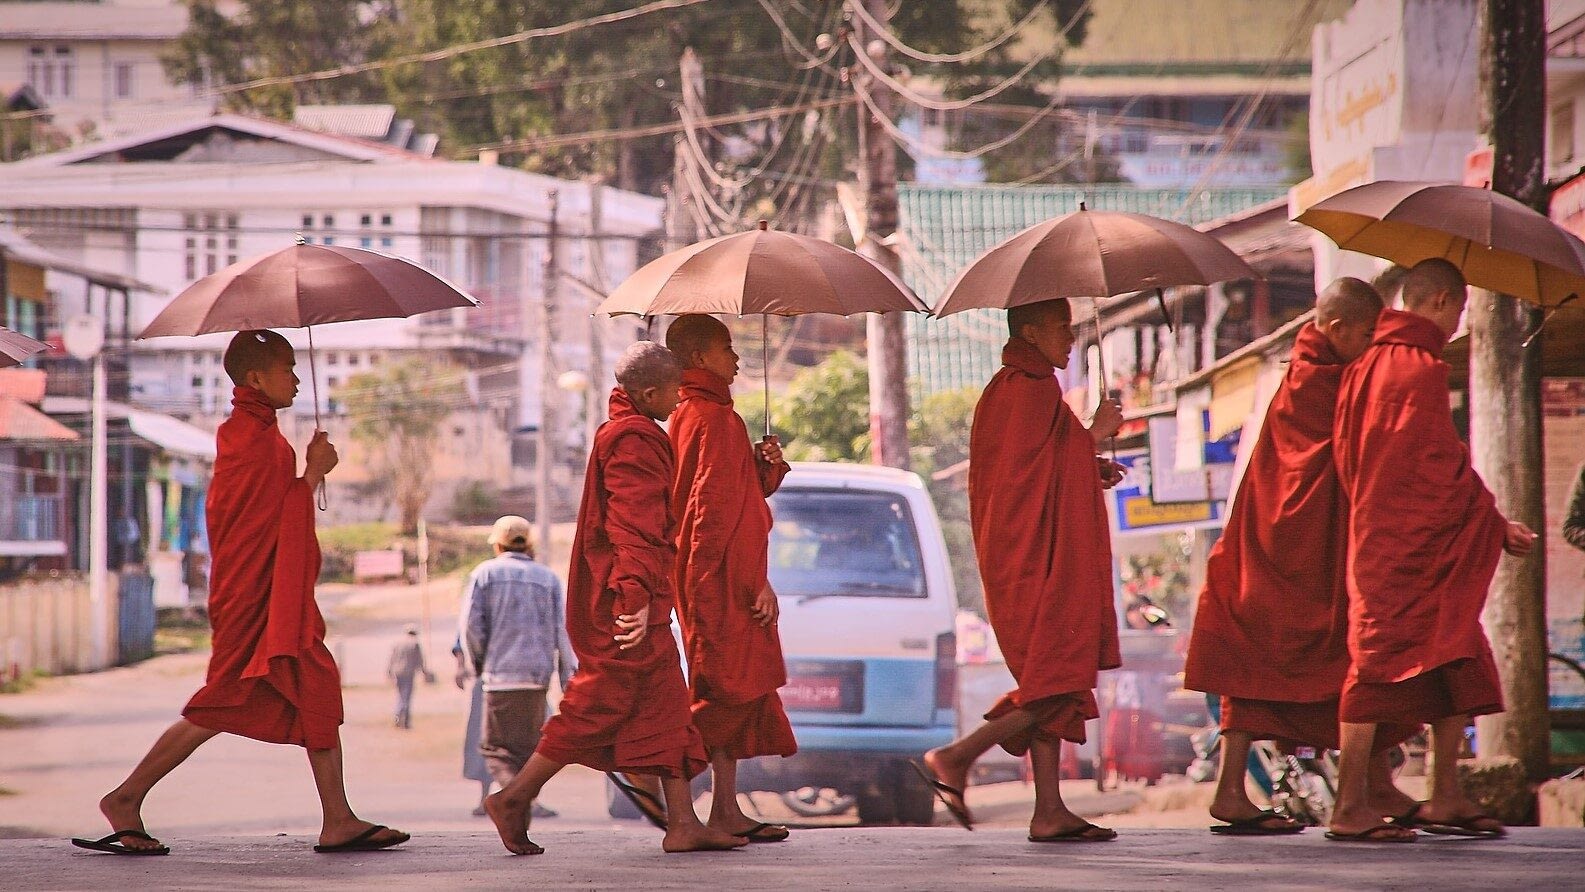 Image: Young monks wearing orange robes, much like those being made from plastic waste by the monastery at Wat Chak Daeng, crossing the road with umbrellas